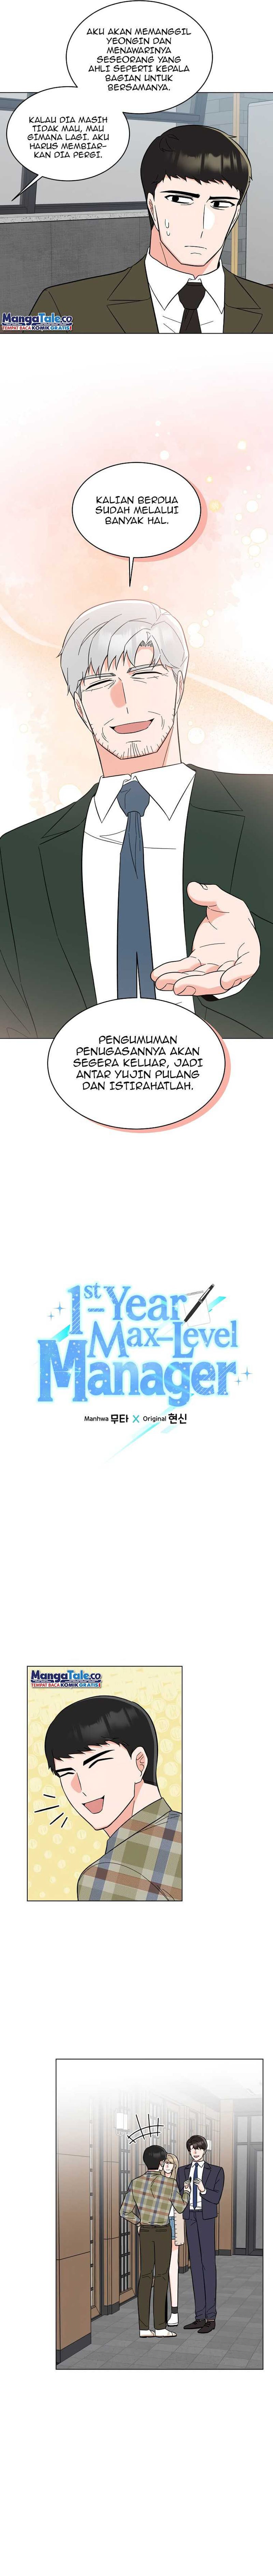 1st Year Max Level Manager Chapter 99